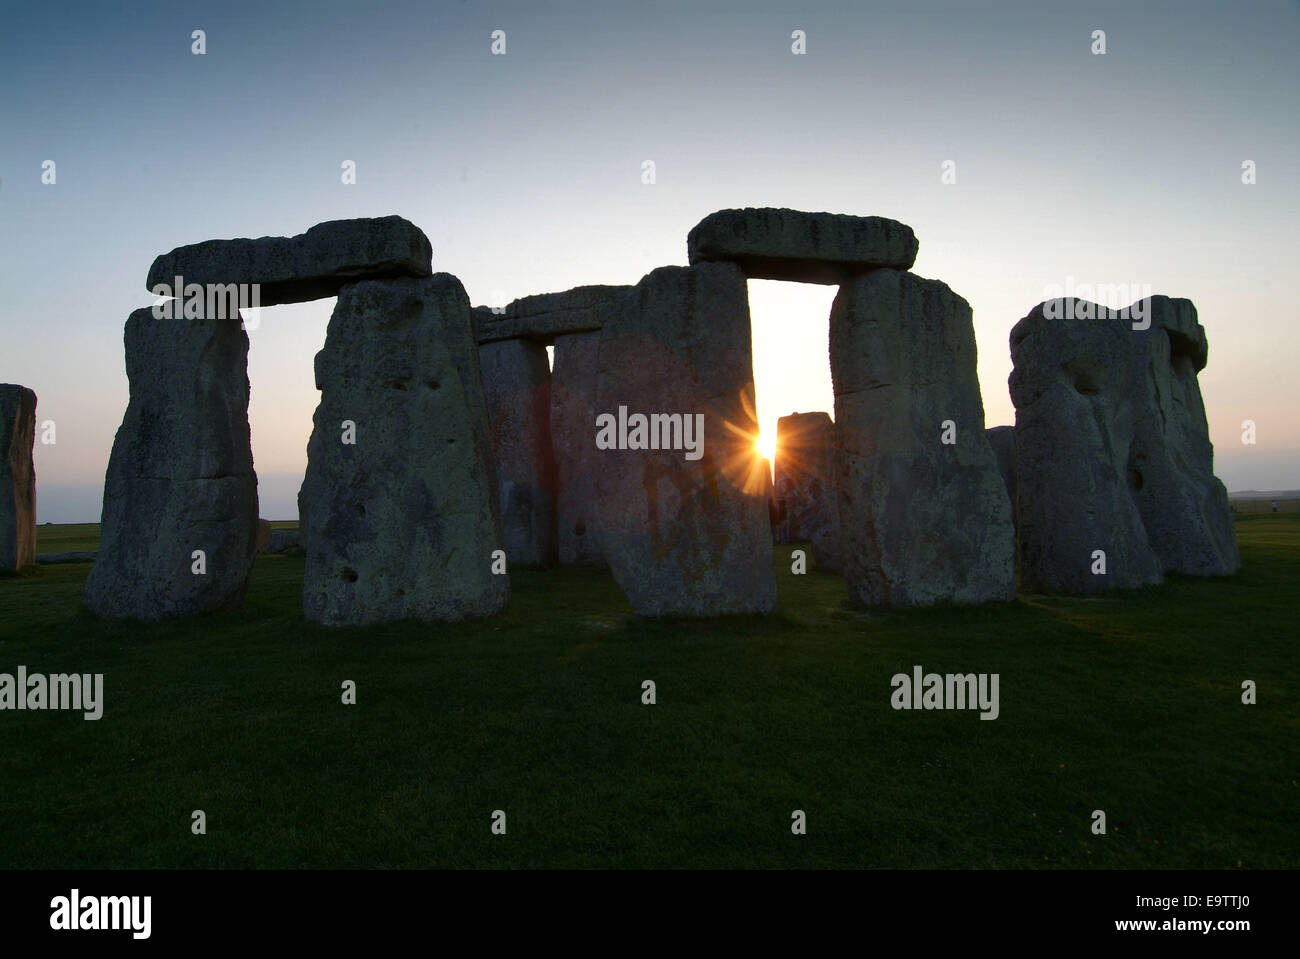 Stonehenge a prehistoric stone circle in Wiltshire,UK,the monument is operated by English Heritage.a UK'Salisbury Plain' Stock Photo